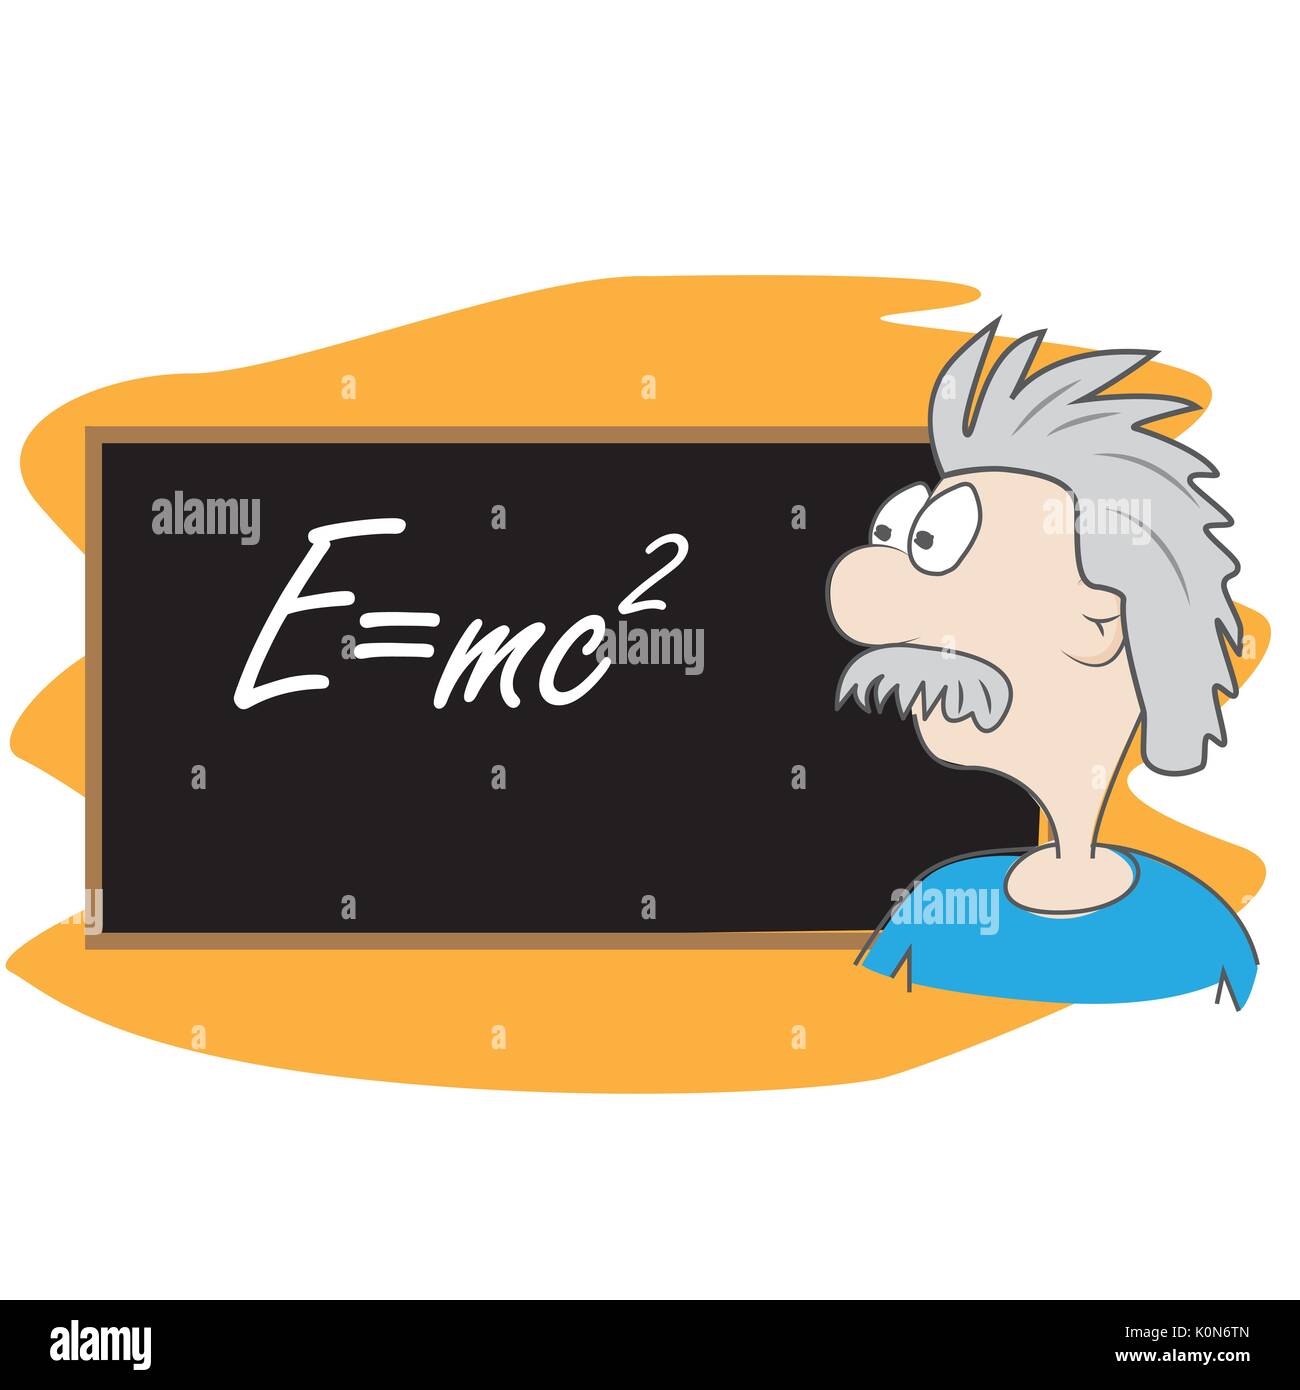 albert einstein vector cartoon illustration. scientist in front of board with his famous formula e=mc2 Stock Vector